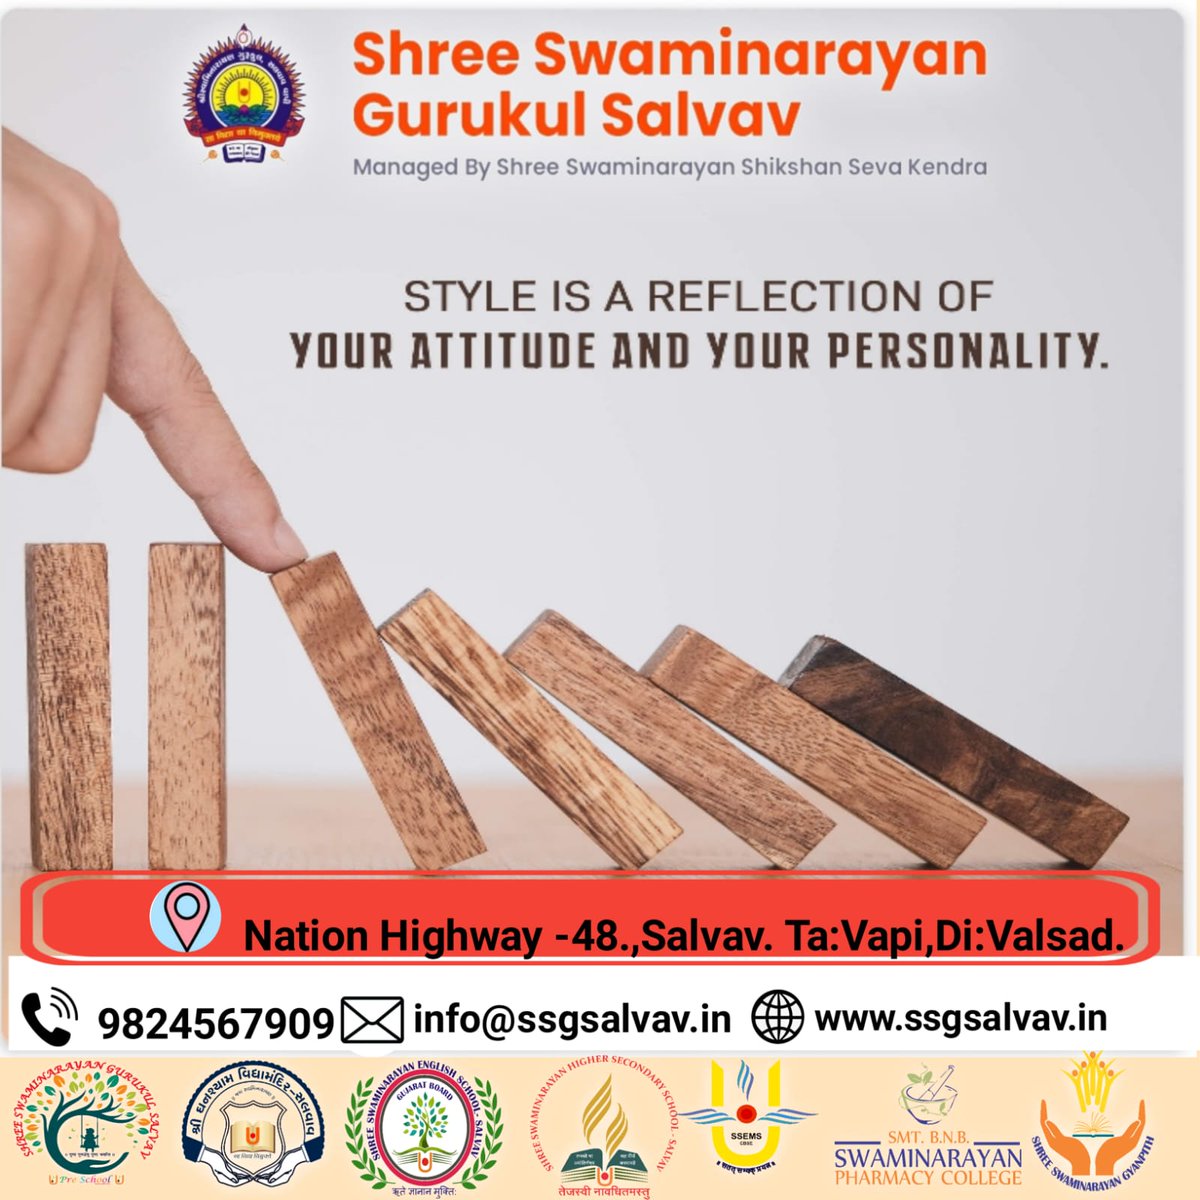 Jai Swaminarayan.......

“Perfection is not attainable, but if we chase perfection we can catch excellence.”

#positive
#Attitude
#student
#shreeswaminarayan
#Gurukul
#salvav